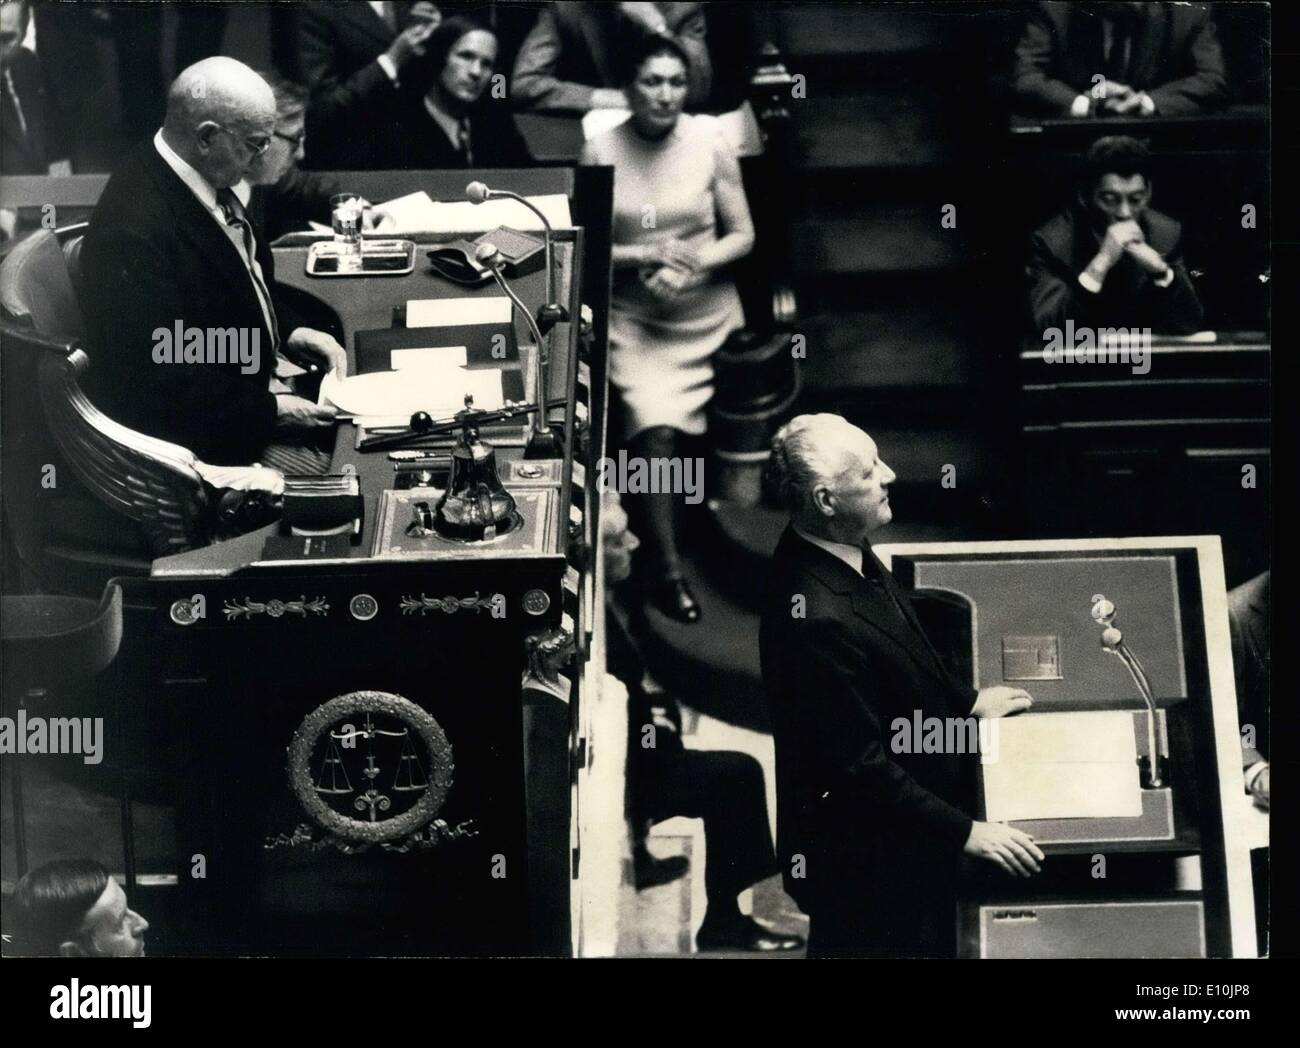 Apr. 11, 1973 - Prime Minister Pierre Messmer is pictured giving a speech. President of the National Assembly, Edgar Faure is sitting above him. Stock Photo